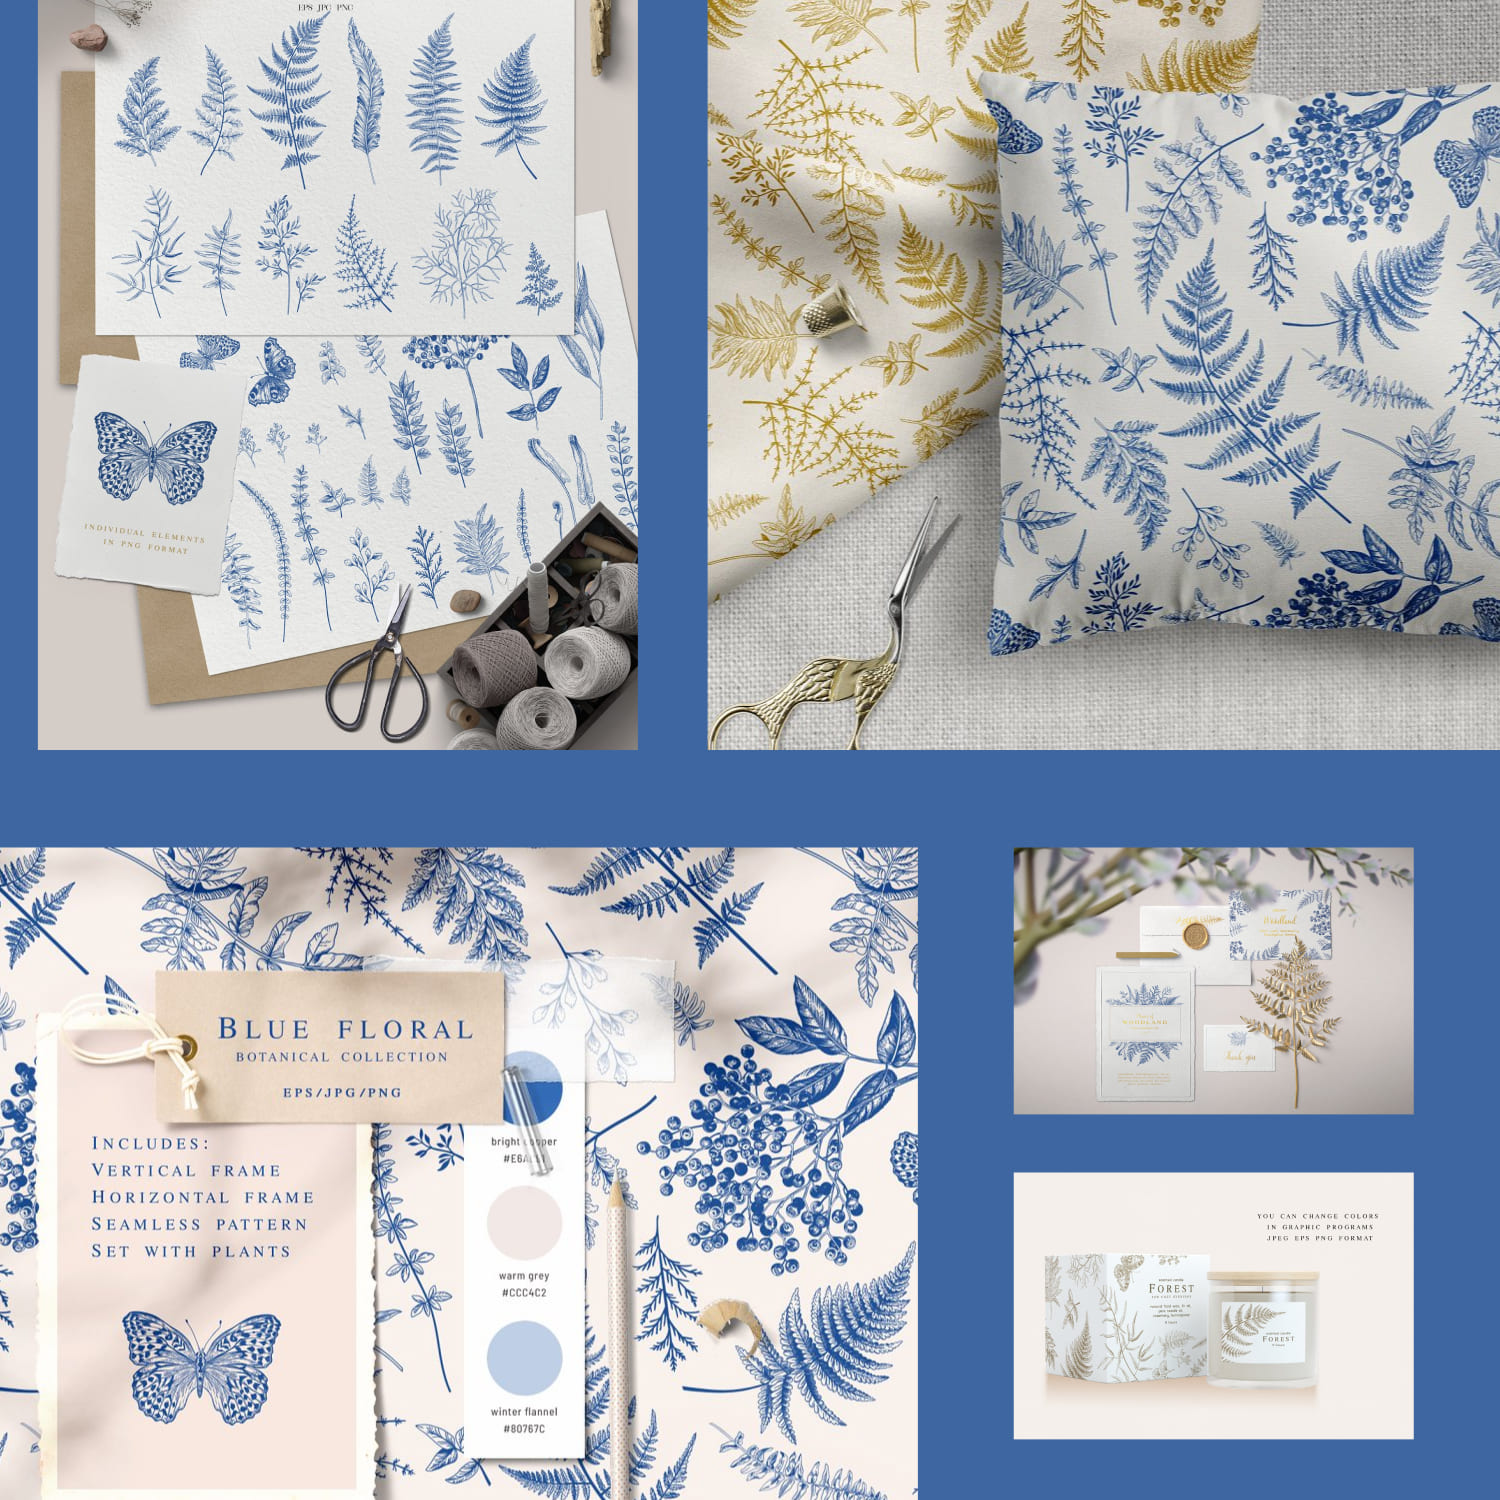 Blue floral. Botanical collection cover.